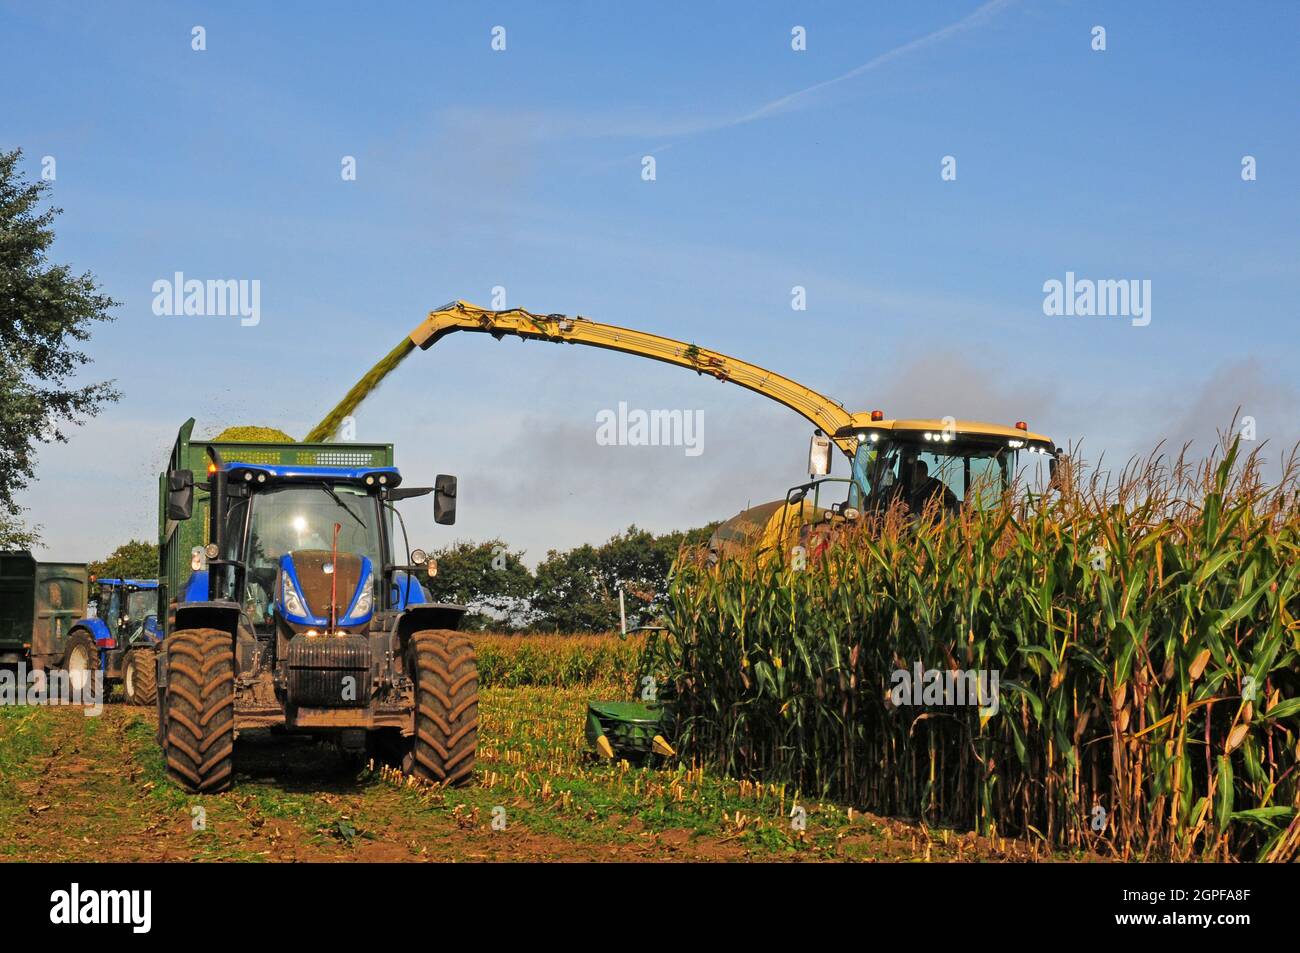 Crop harvester almost hidden by growing maize, shooting ground up plants into trailer. Second tractor and trailer waiting behind. Stock Photo